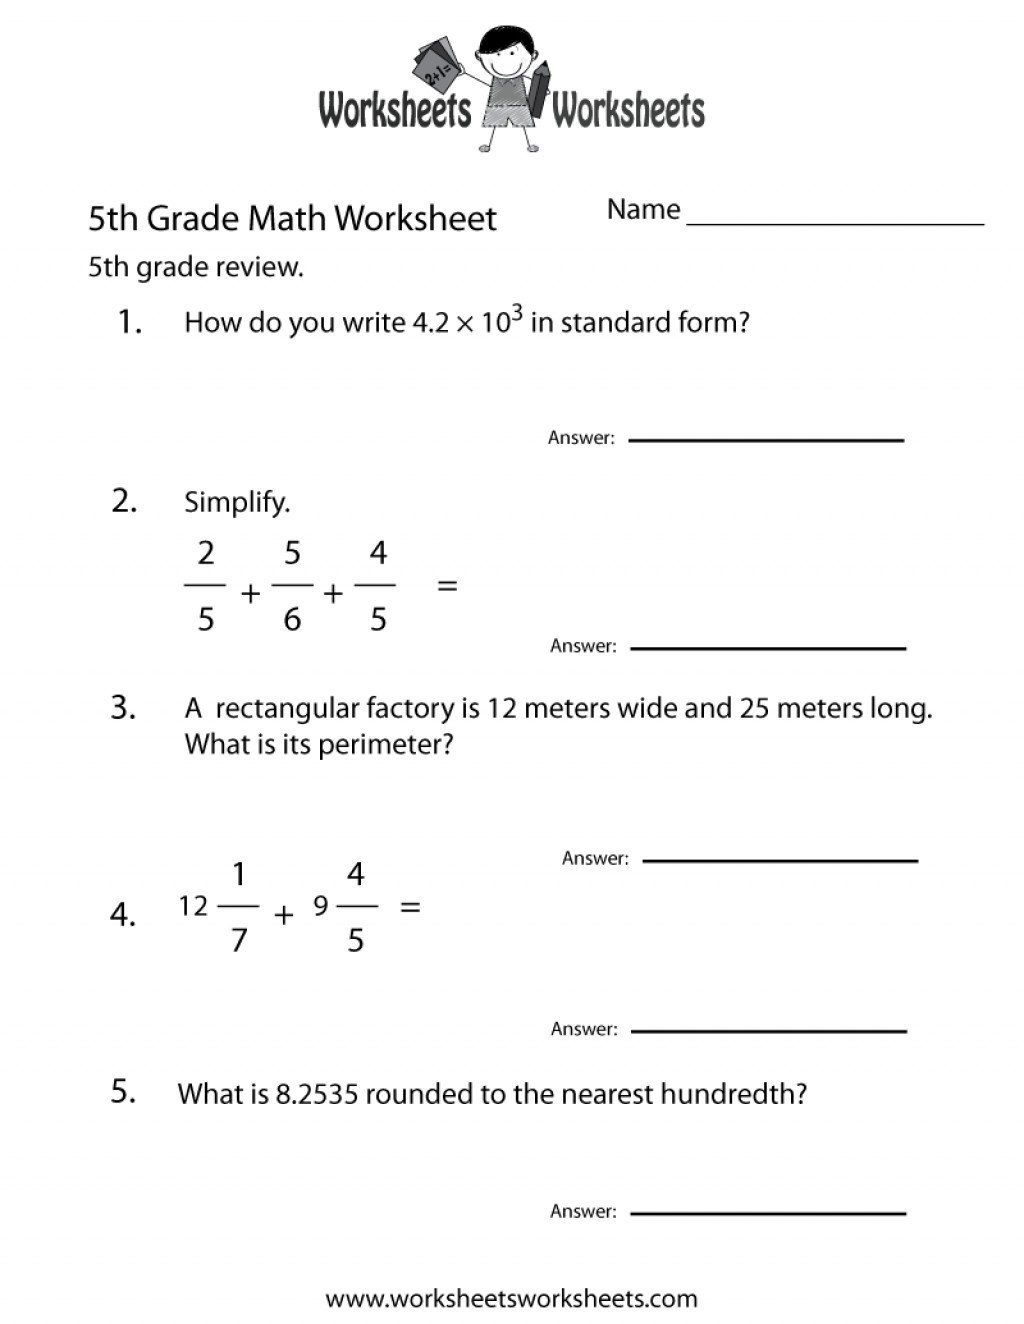 Probability Worksheets 7th Grade theoretical Probability Worksheet 7th Grade